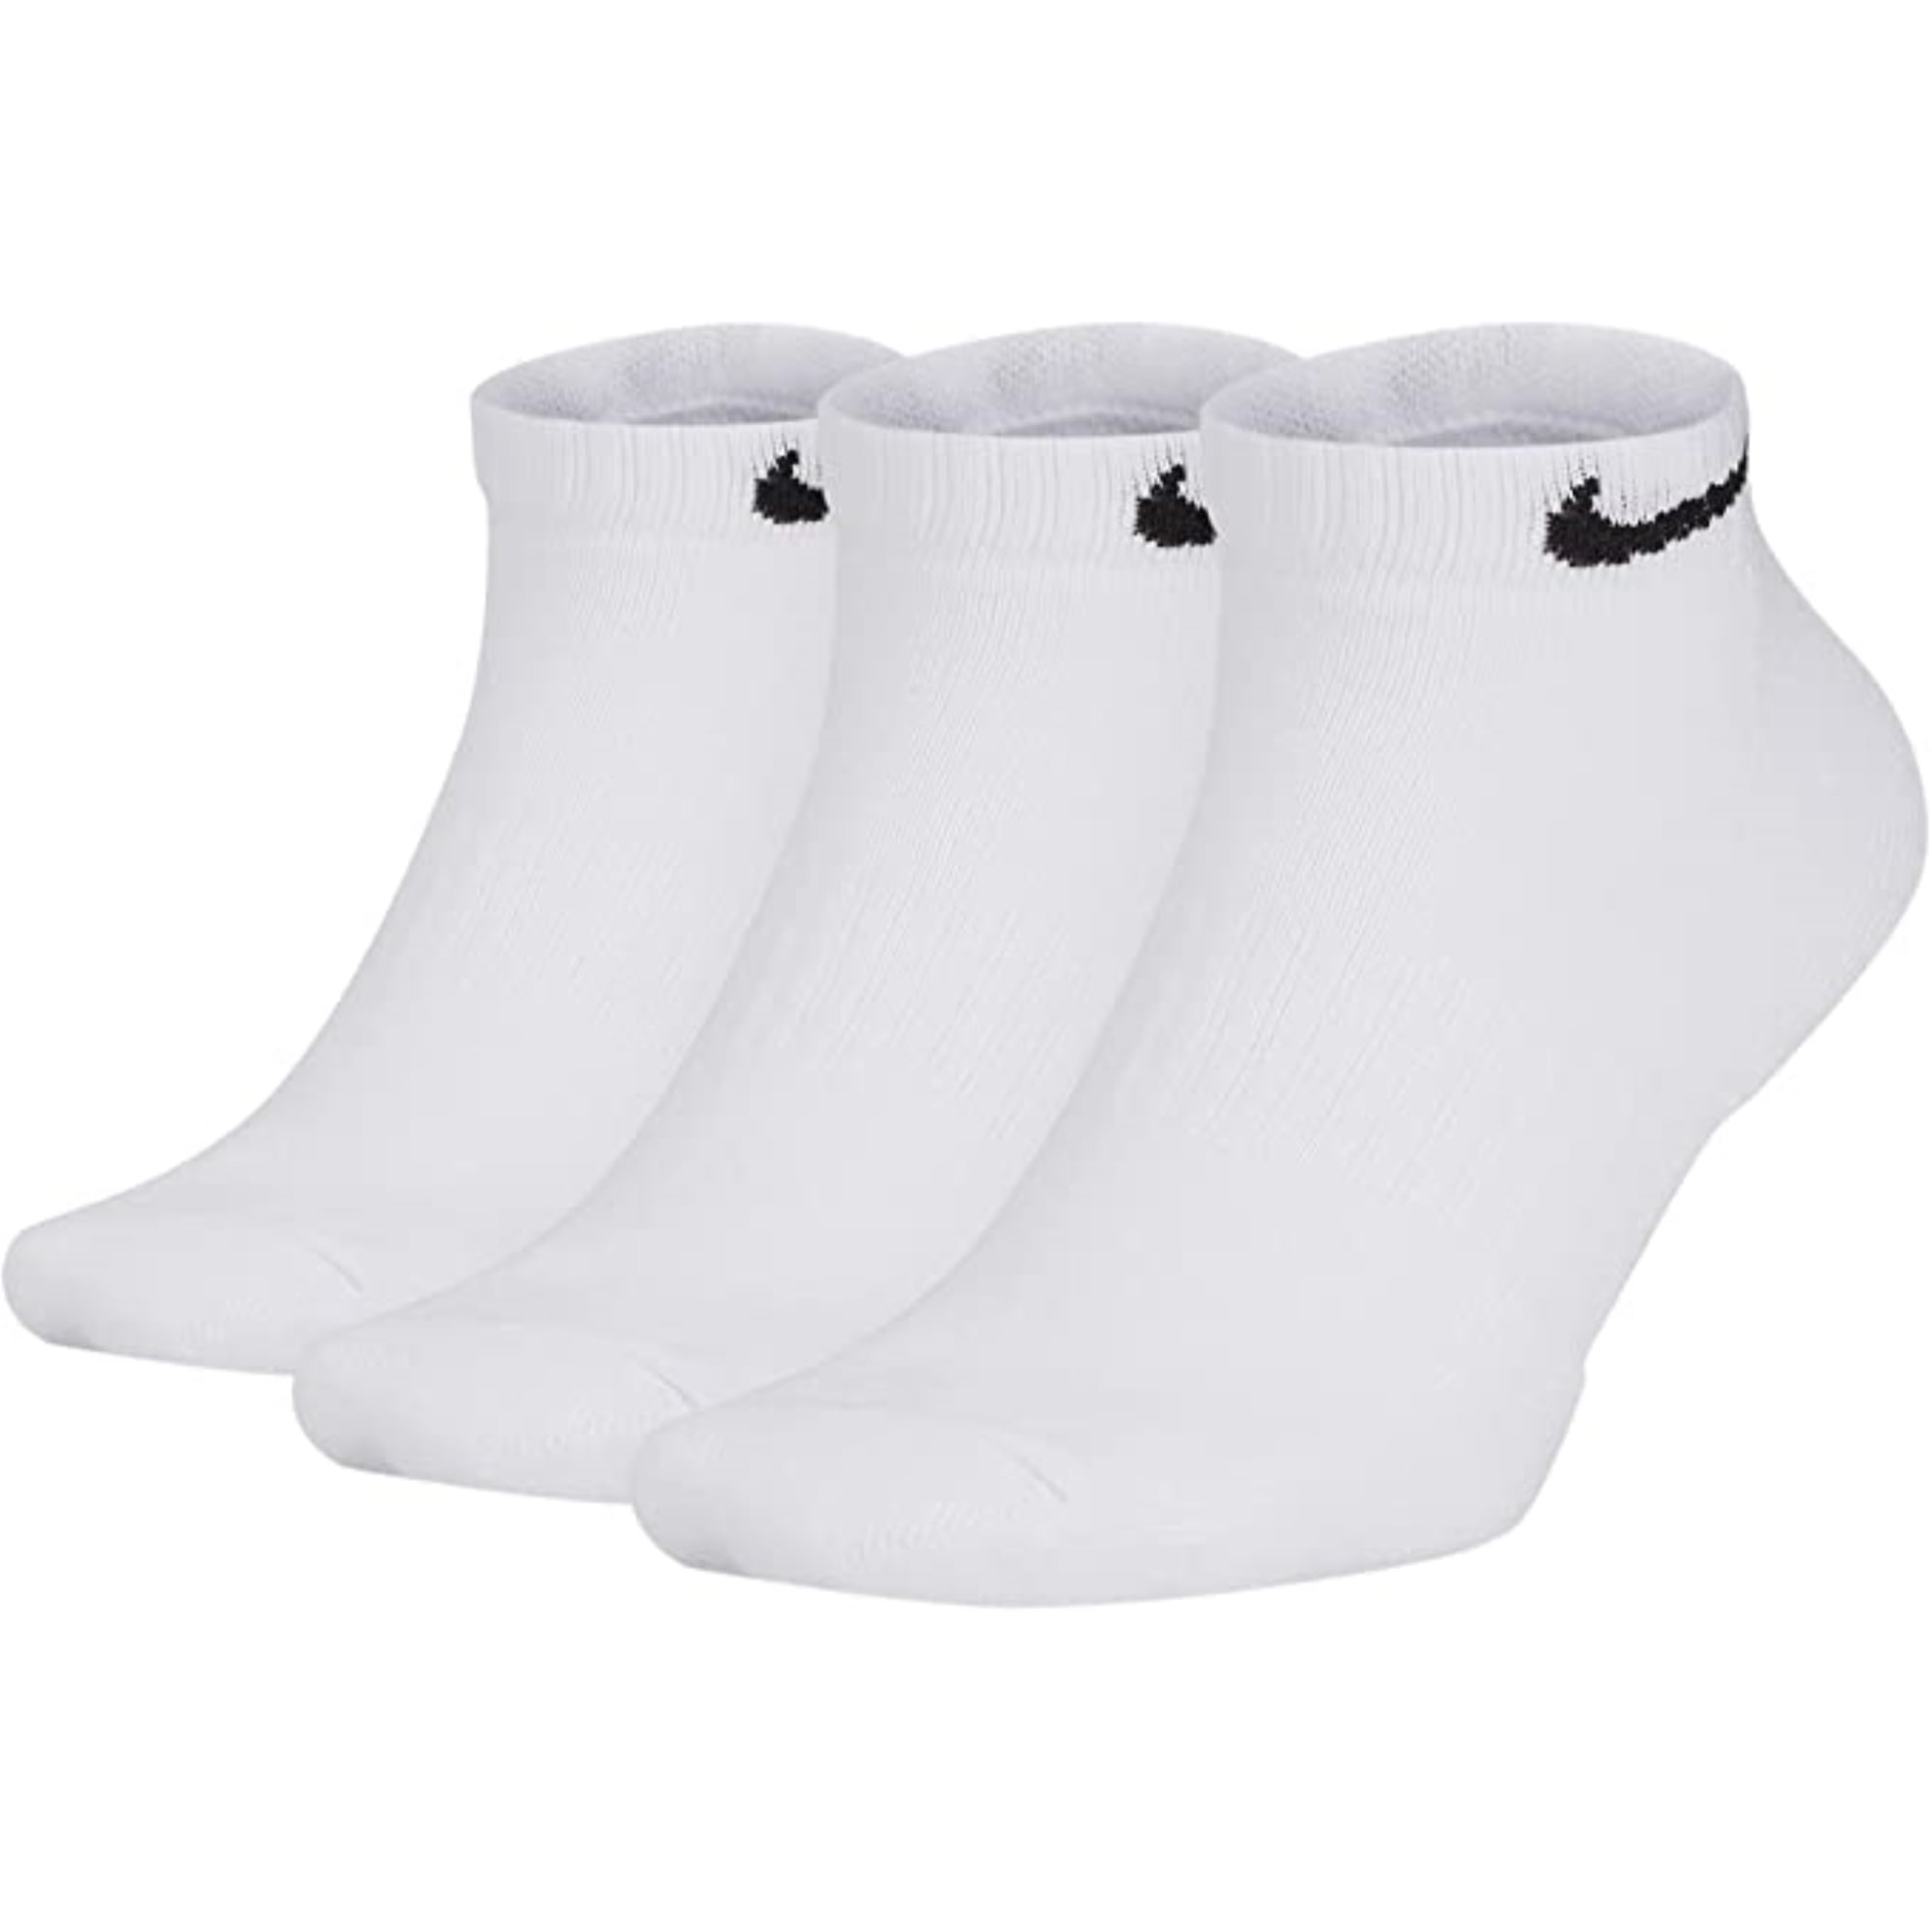 pasta Inspecteren nikkel Nike Everyday Cotton Cushioned Low Cut Training Socks with Sweat-Wicking  Technology (3 Pair), White, Large - Walmart.com